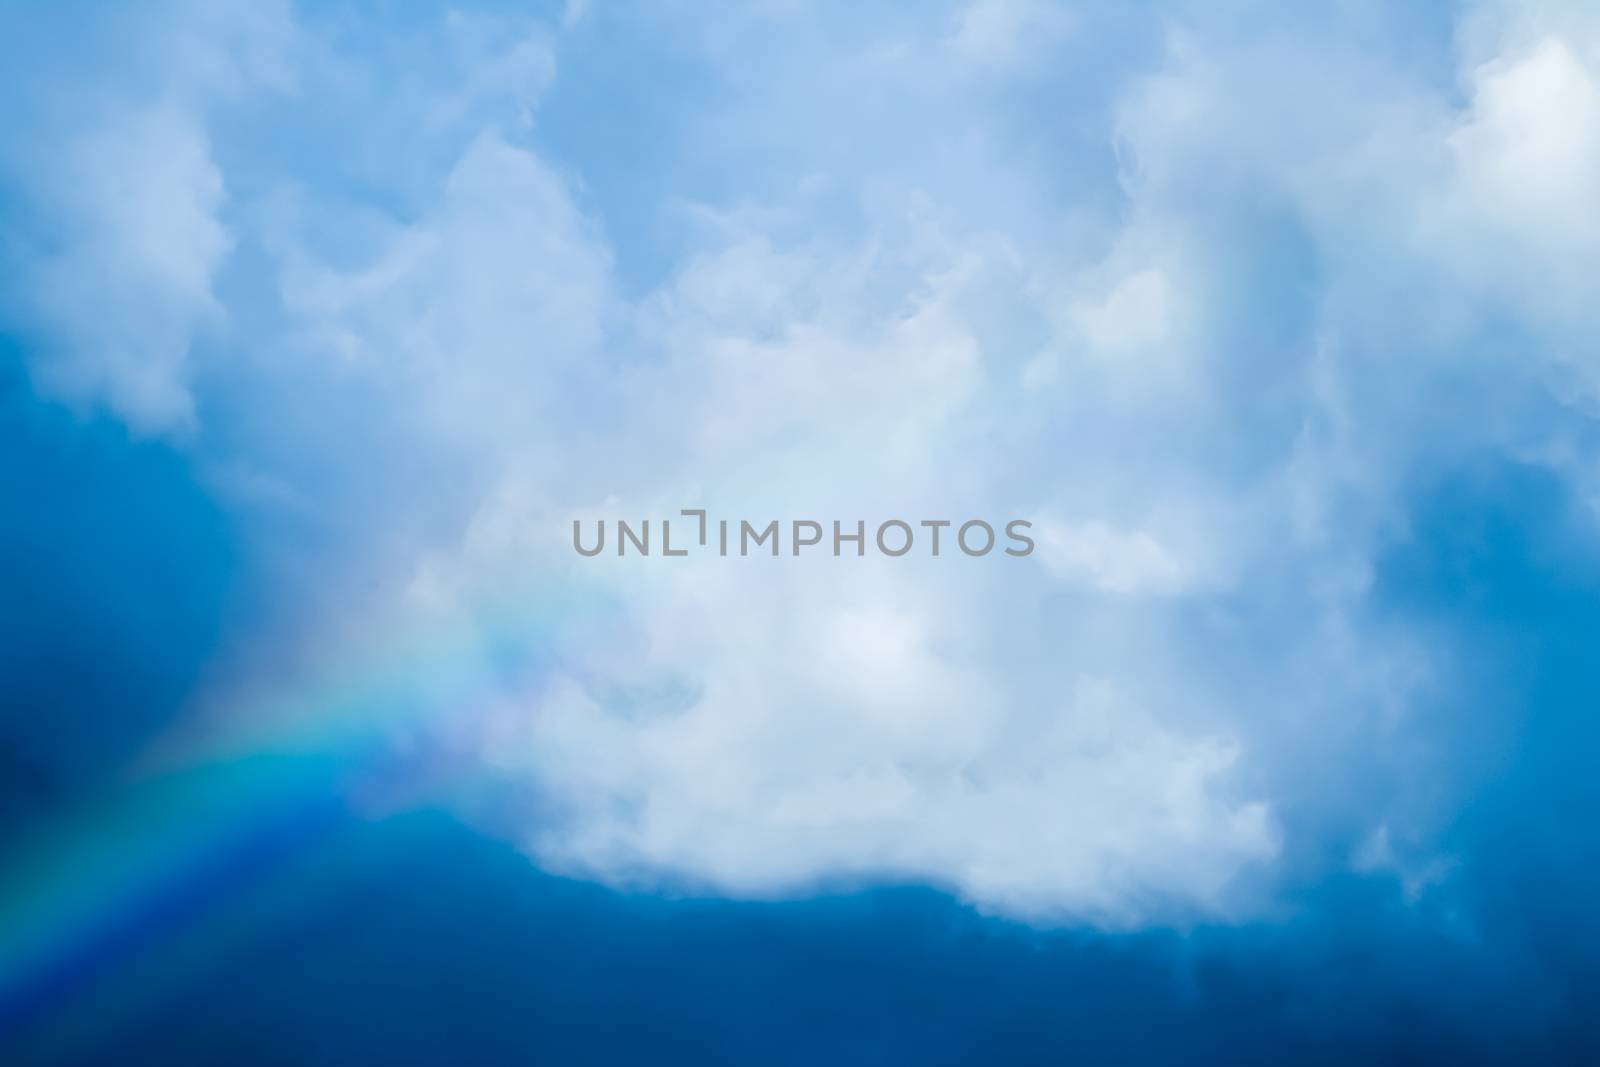 Rainbow in a dreamy blue sky, spiritual and nature backgrounds